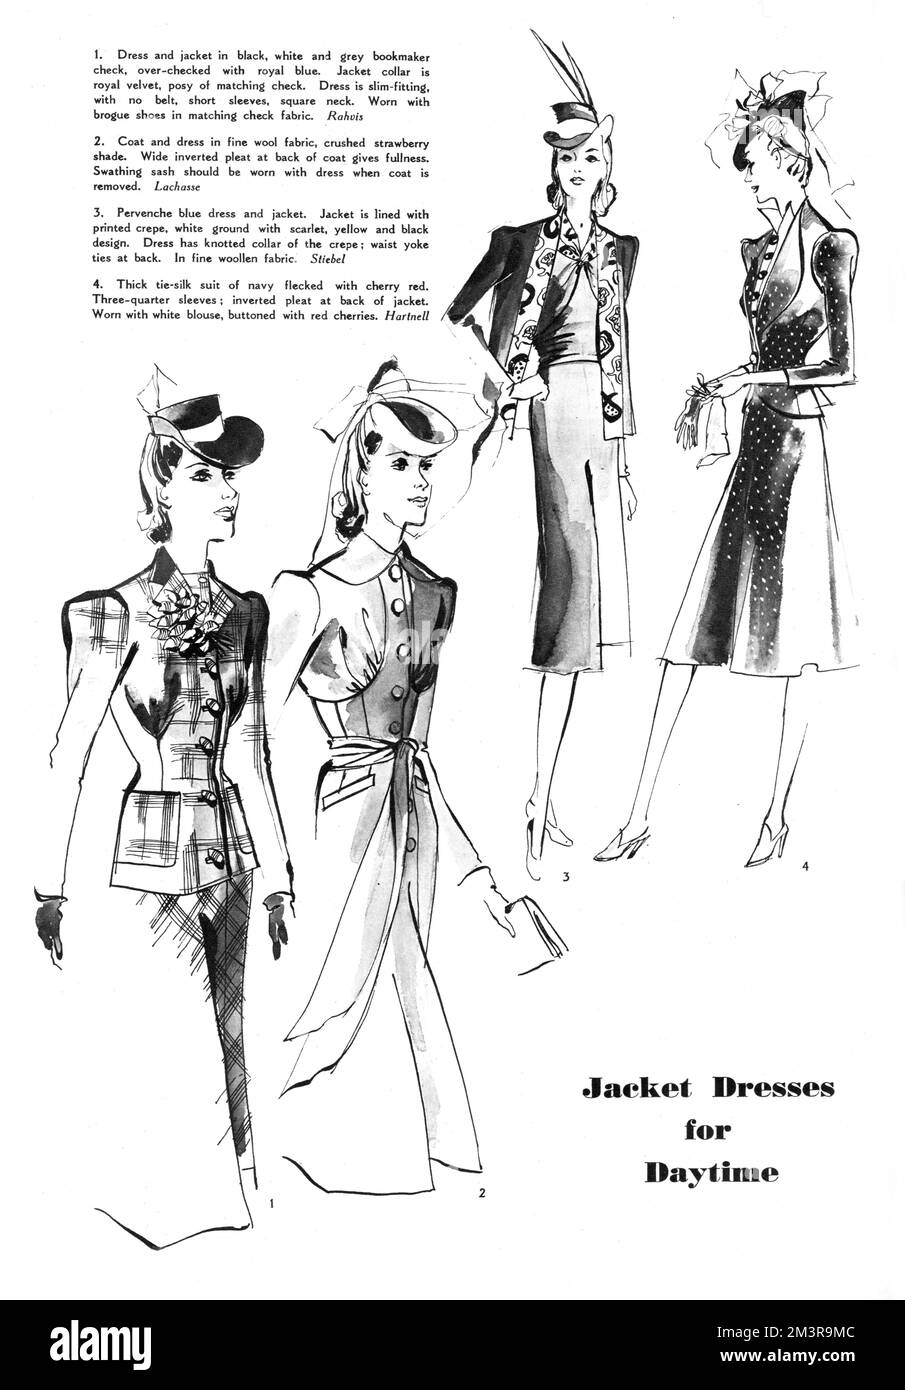 Fashion editorial for the forthcoming Spring embellished by four drawings of women wearing daytime jacket dresses designed by famous designers. The items reproduced include a slim-fitting dress and royal velvet jacket by Rahvis, a coat and dress in fine wool fabric by Lachasse, a woollen blue dress and jacket by Victor Stiebel and a thick tie-silk suit by Norman Hartnell.     Date: 1940 Stock Photo